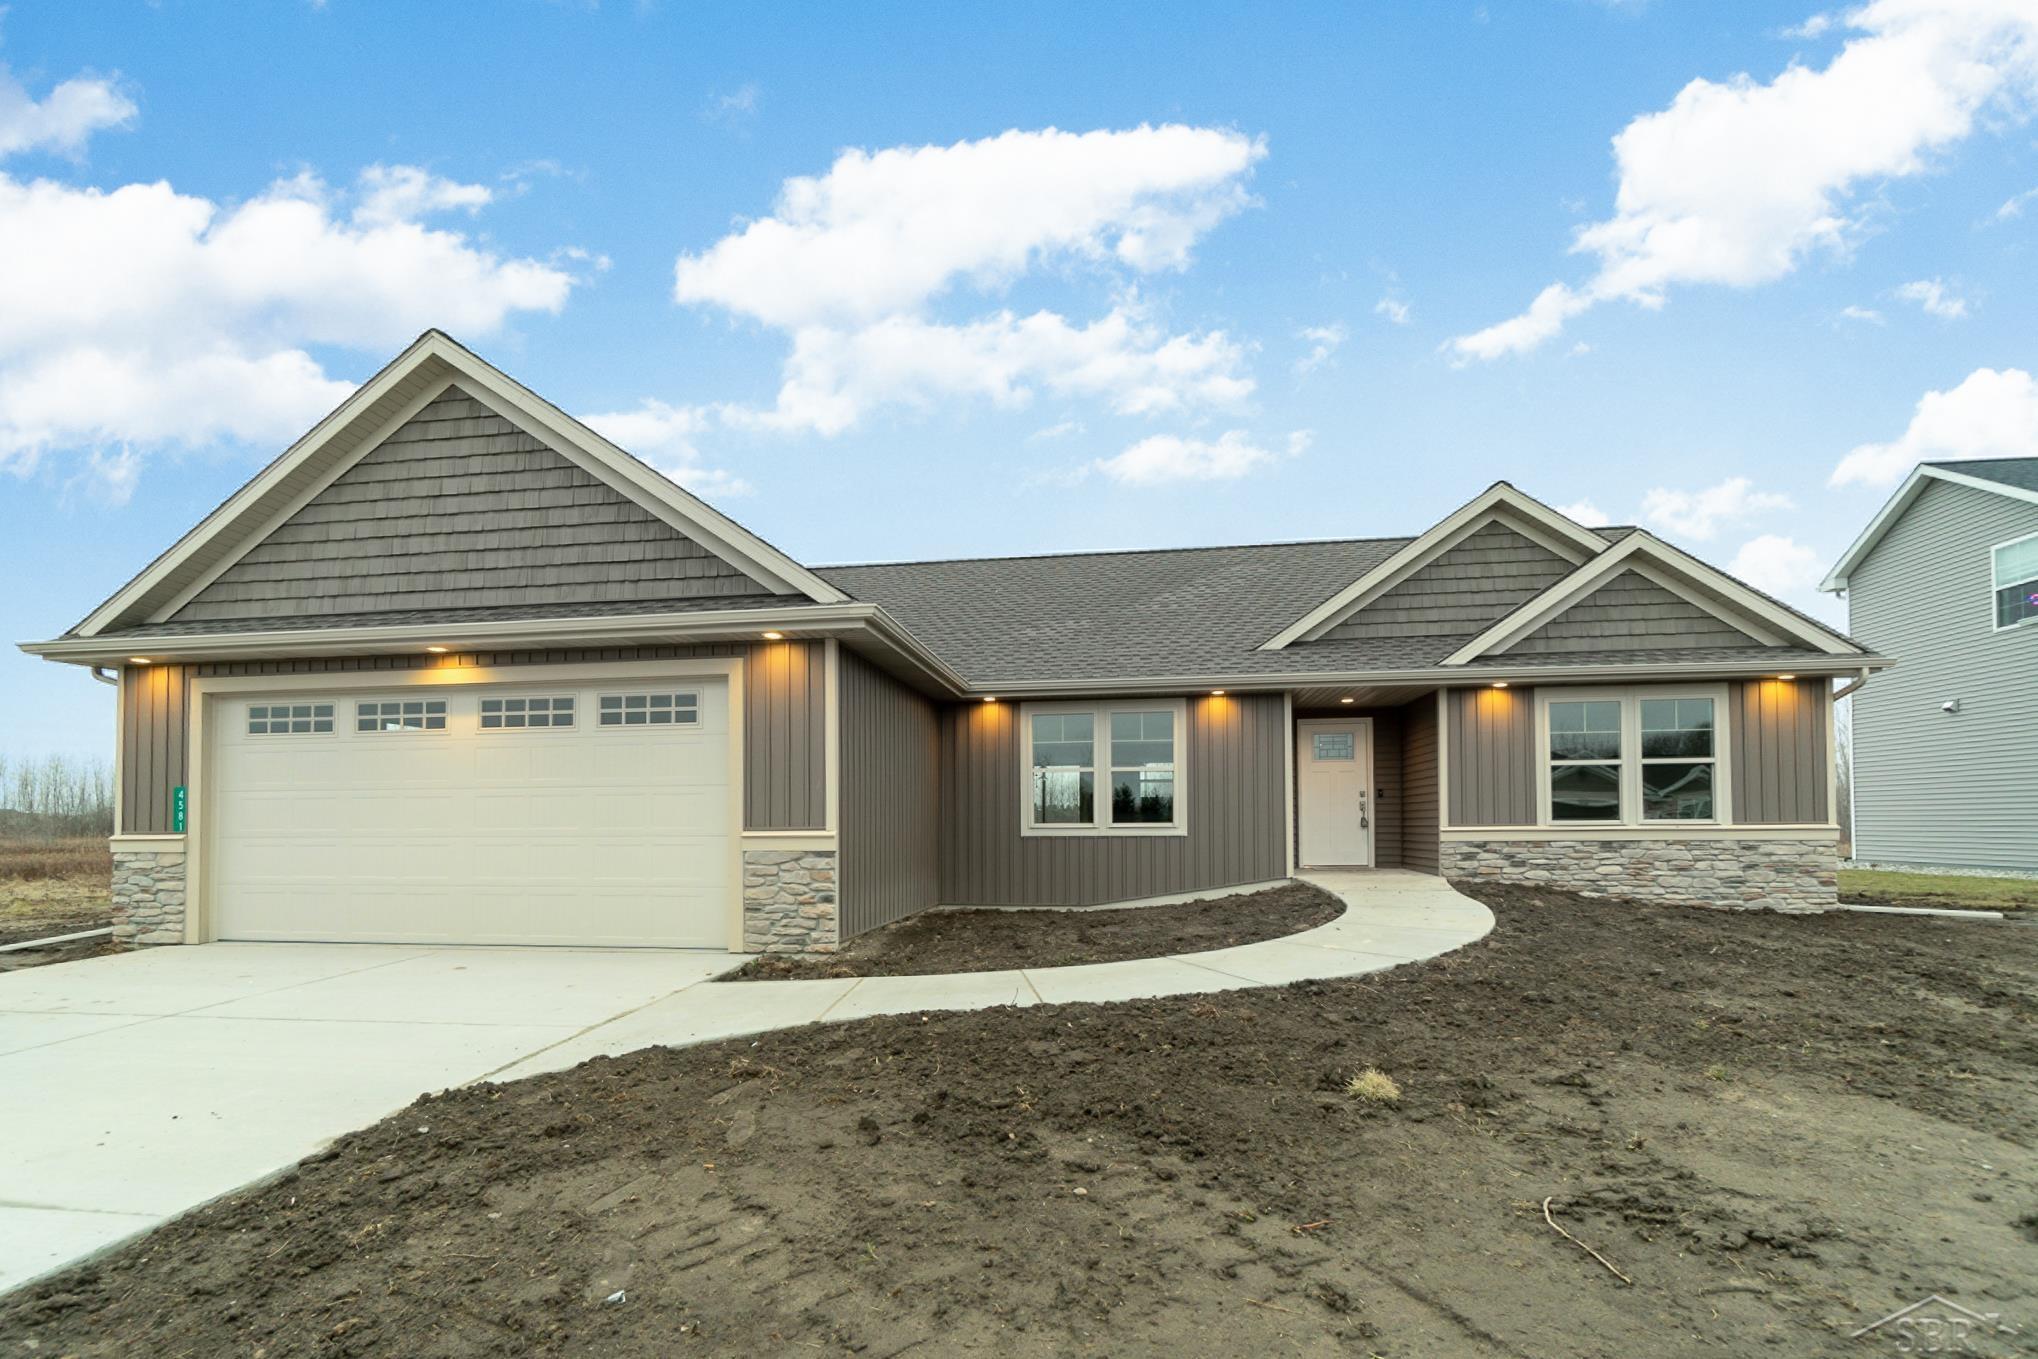 Come see this open concept new build! Big kitchen with large eat in island.  This home features walk in closets and lots of natural light.  Come see today!